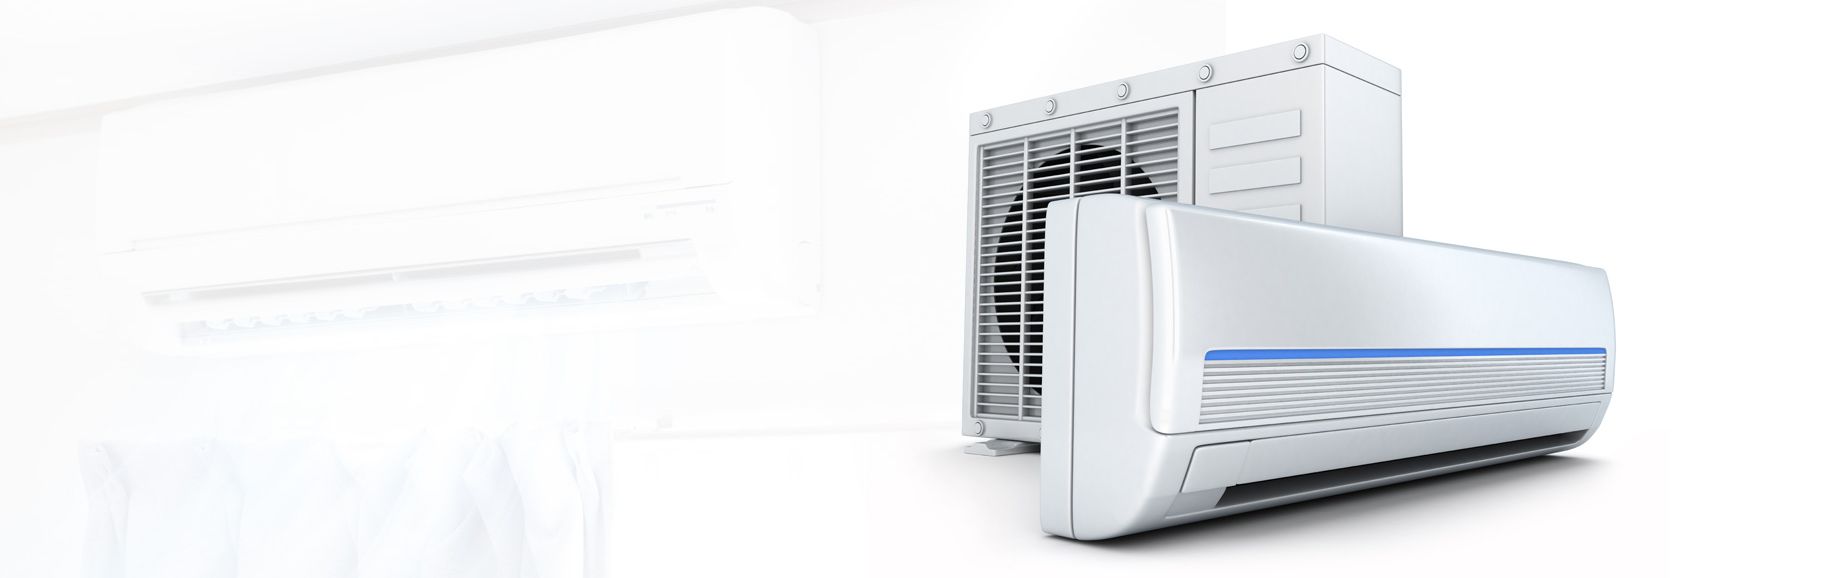 SALE of air conditioning systems for flats, houses or for heating purposes